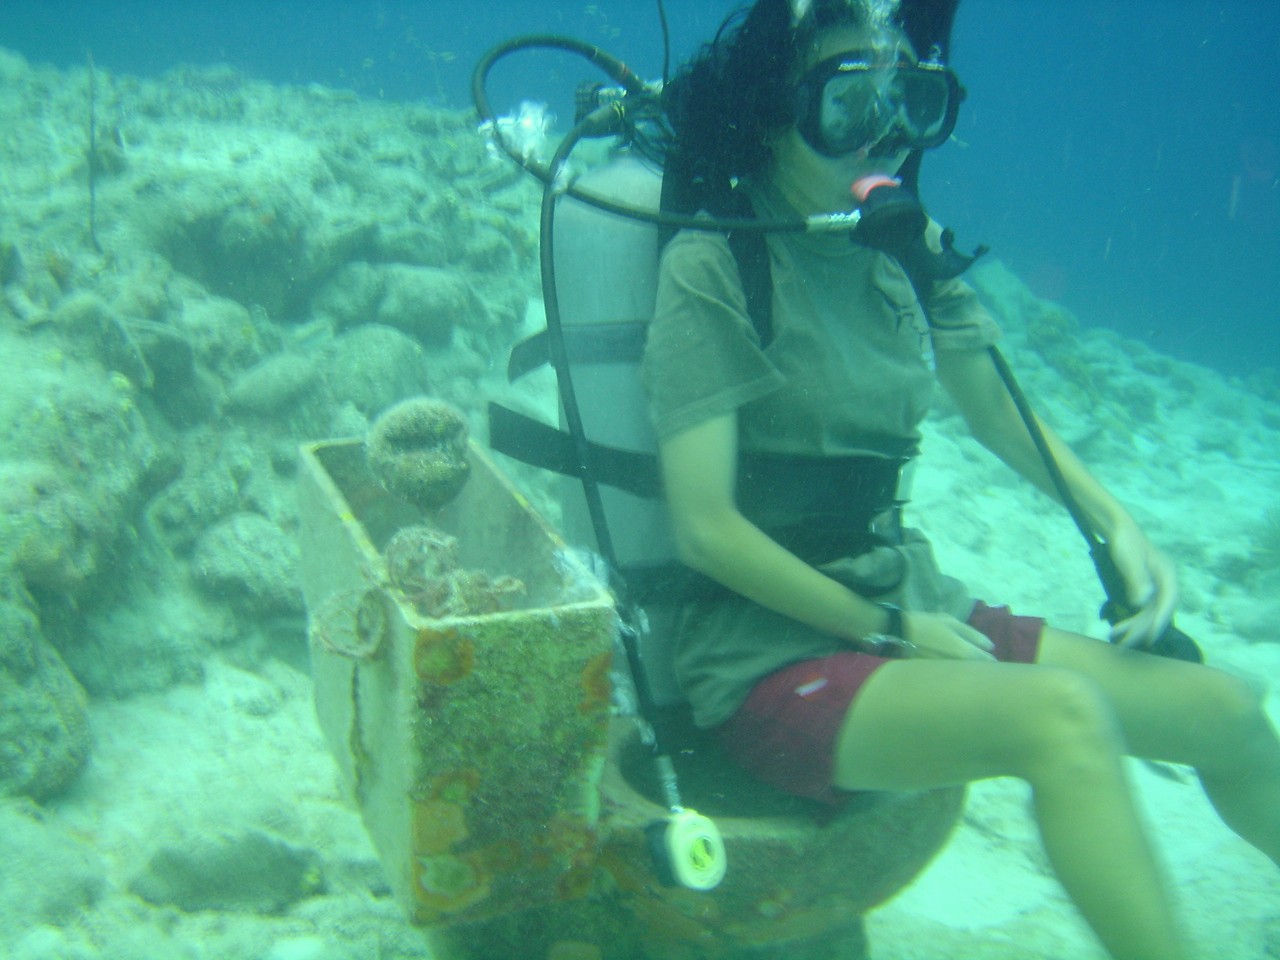 This is me scuba diving!